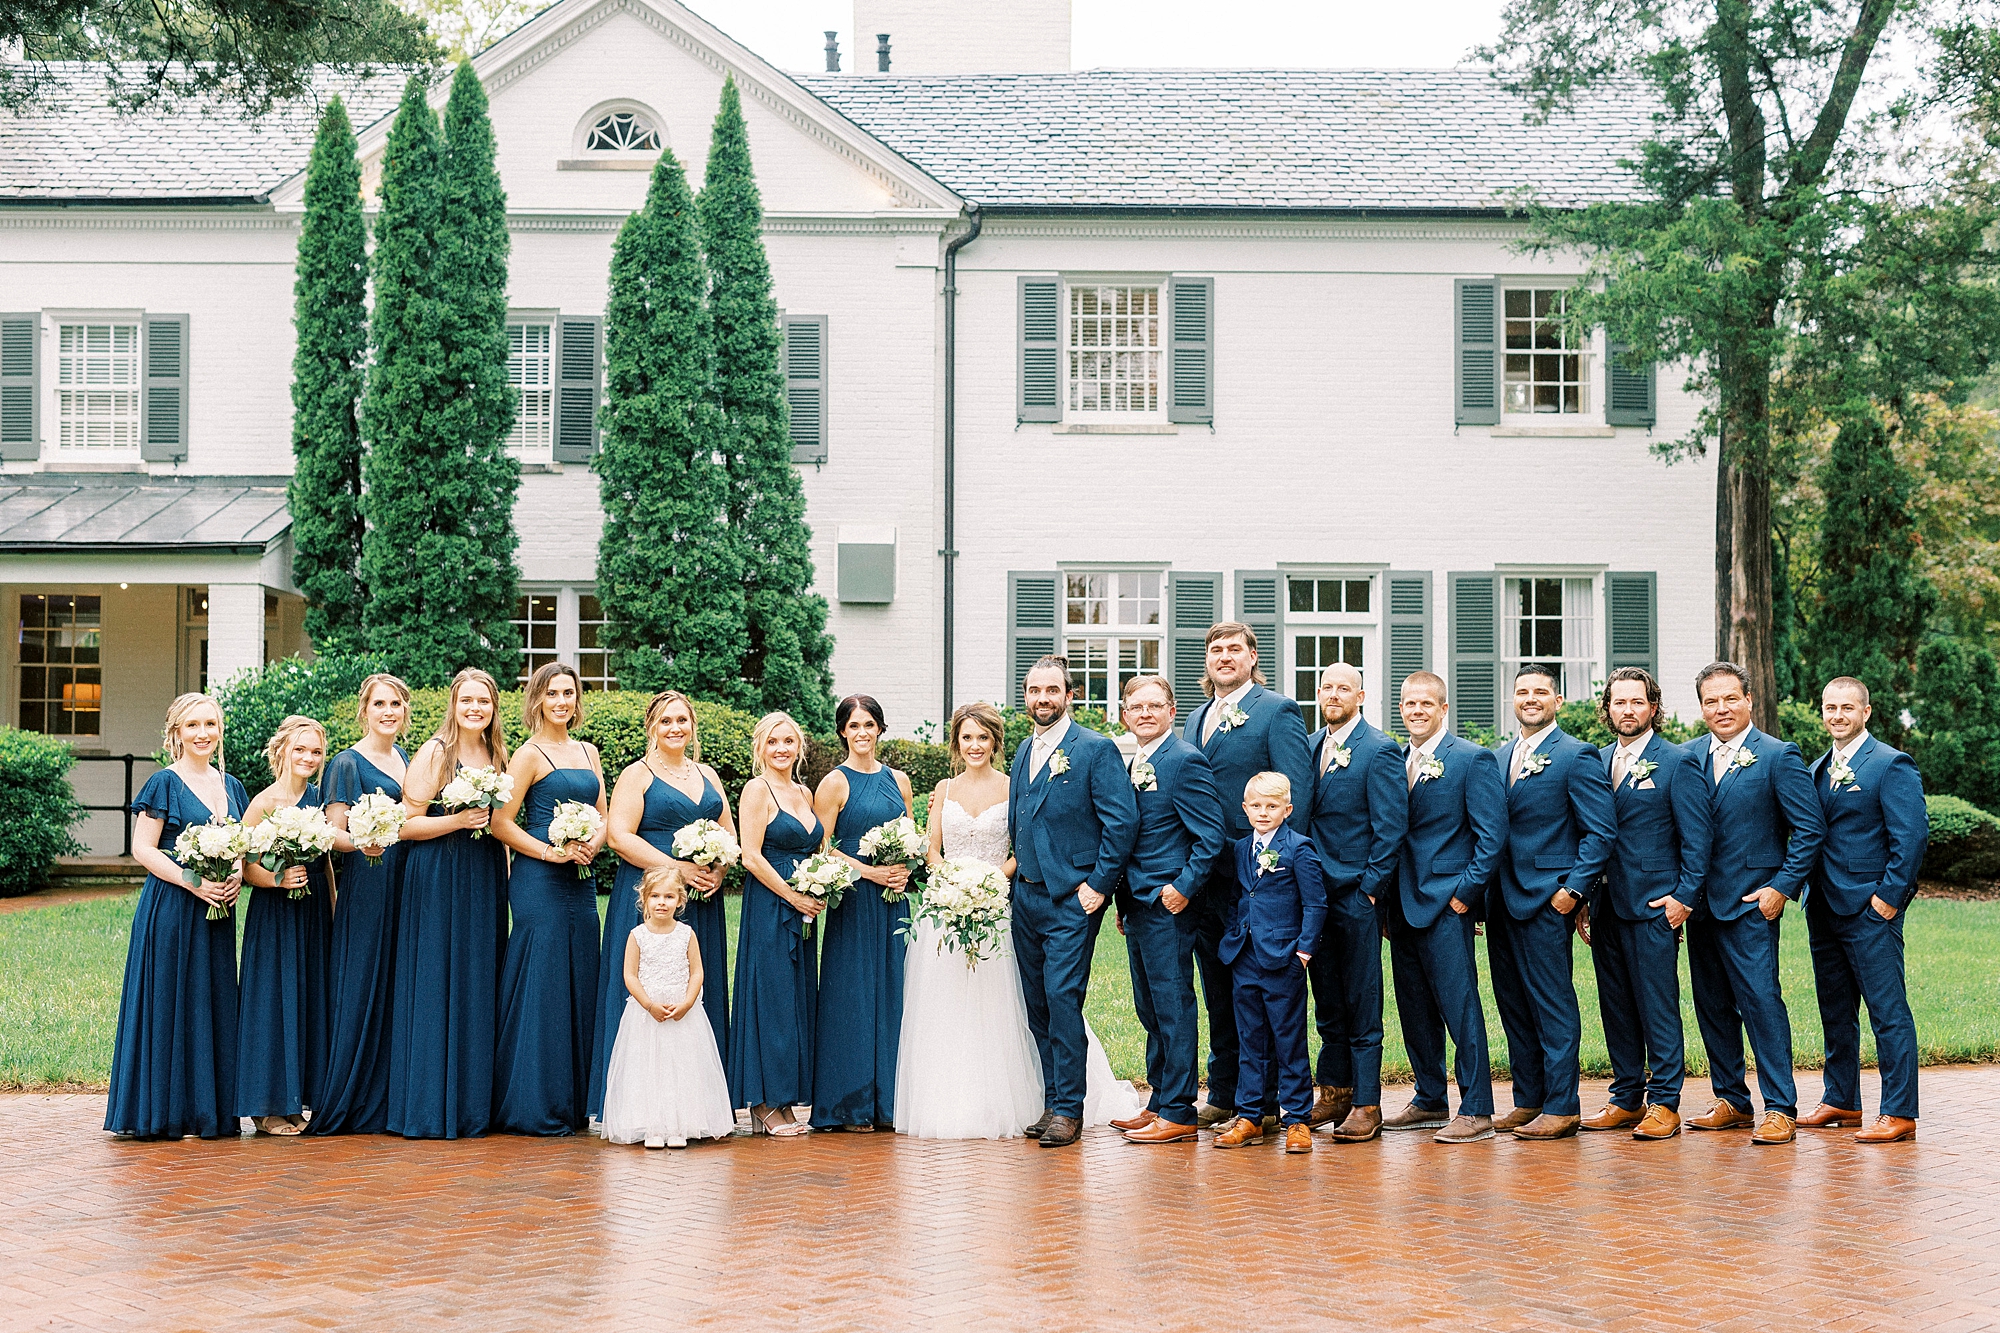 bride and groom stand with wedding party in navy dresses and navy suits